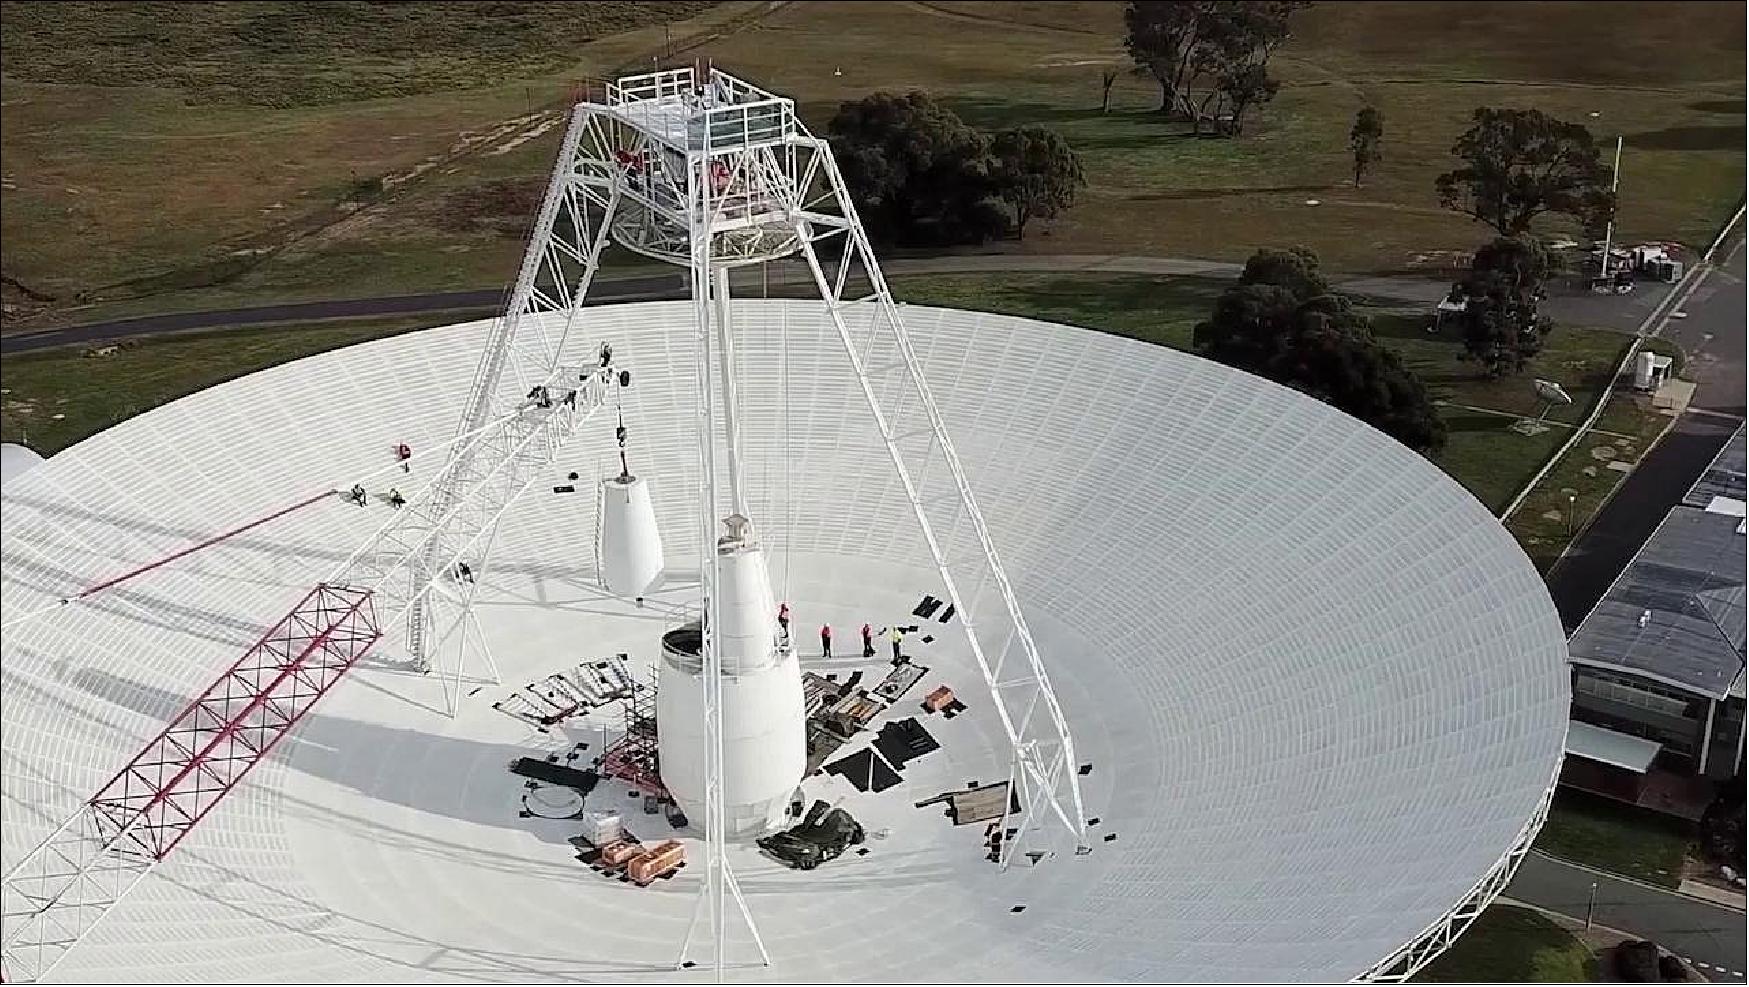 Figure 6: Crews conduct critical upgrades and repairs to the 70-meter-wide (230-foot-wide) radio antenna Deep Space Station 43 in Canberra, Australia. In this image, one of the antenna's white feed cones (which house portions of the antenna receivers) is being moved by a crane (image credit: CSIRO)